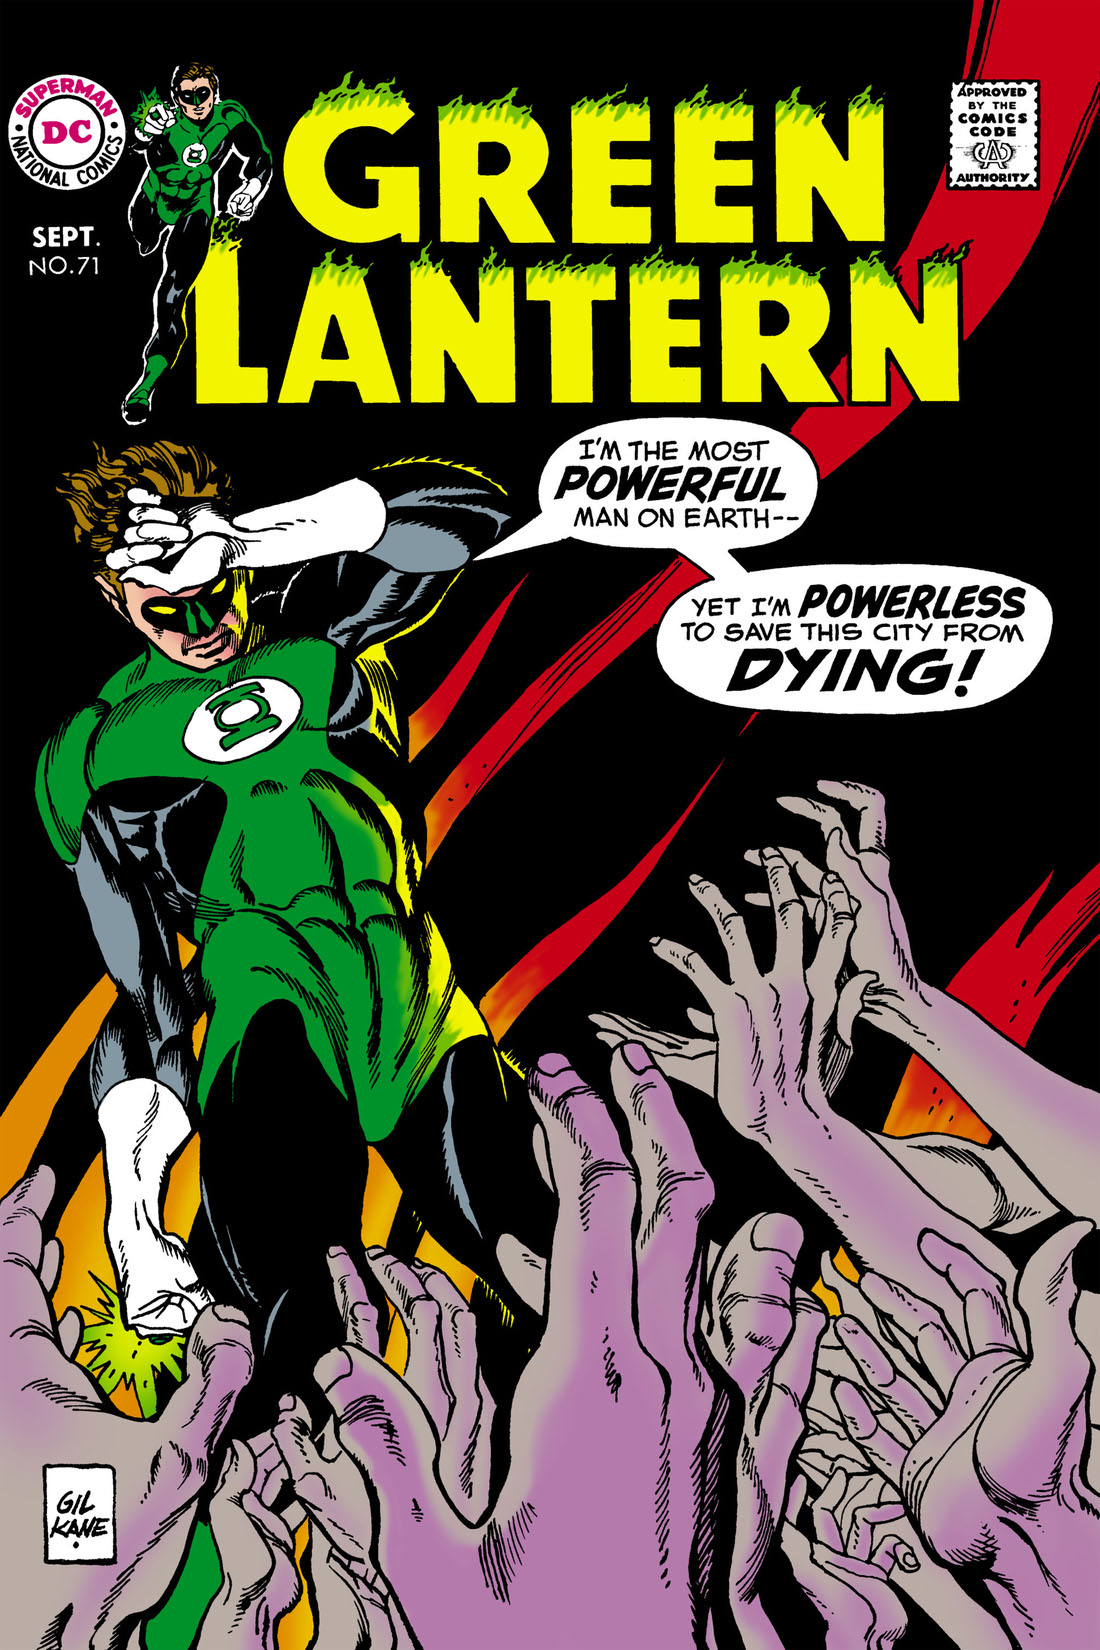 Green Lantern (1960-) #71 preview images